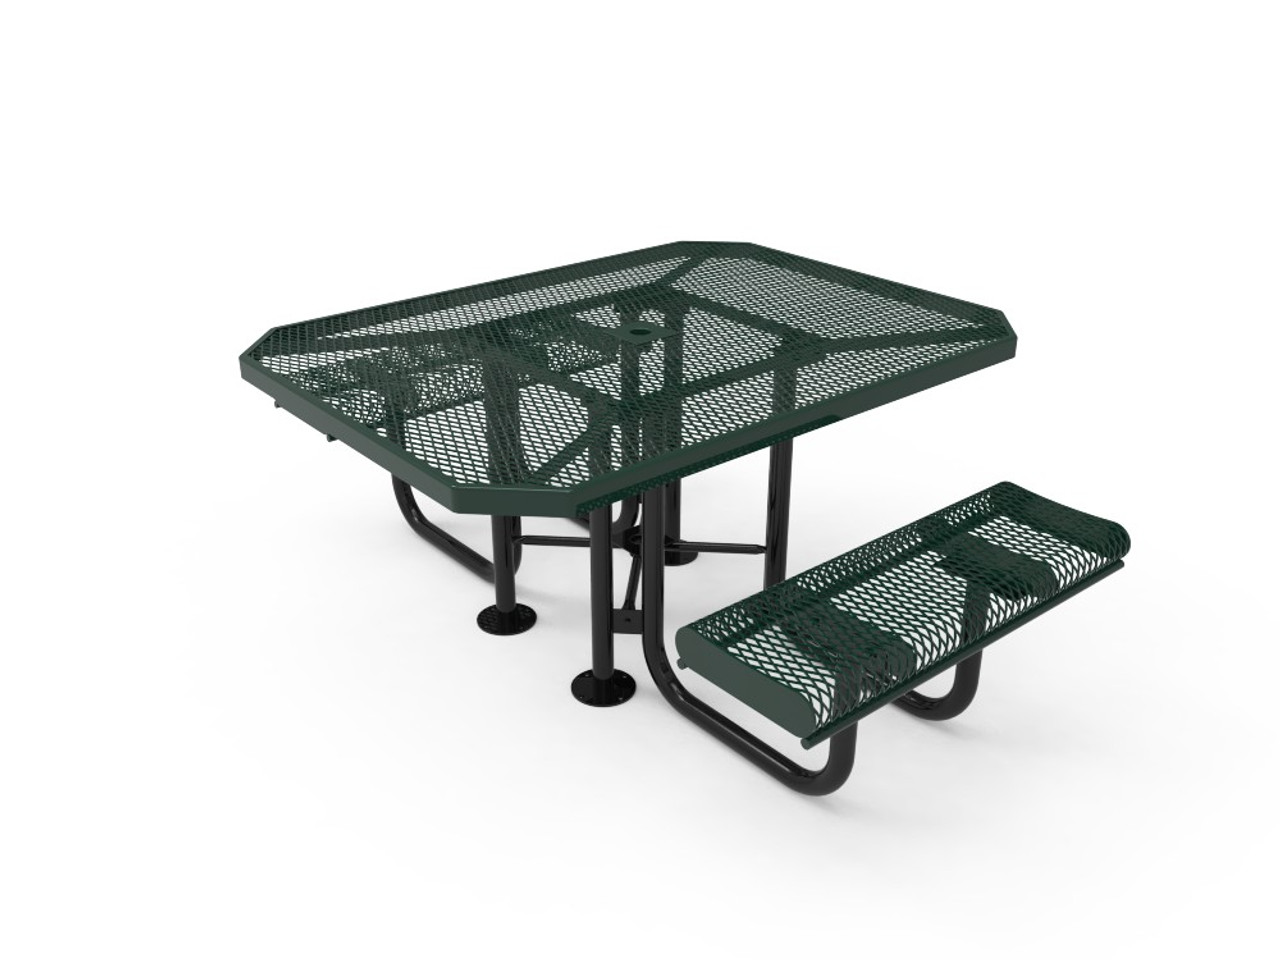 46" Octagon ADA 2 Seat Metal Outdoor Table Expanded Metal with Rolled Edges - Portable